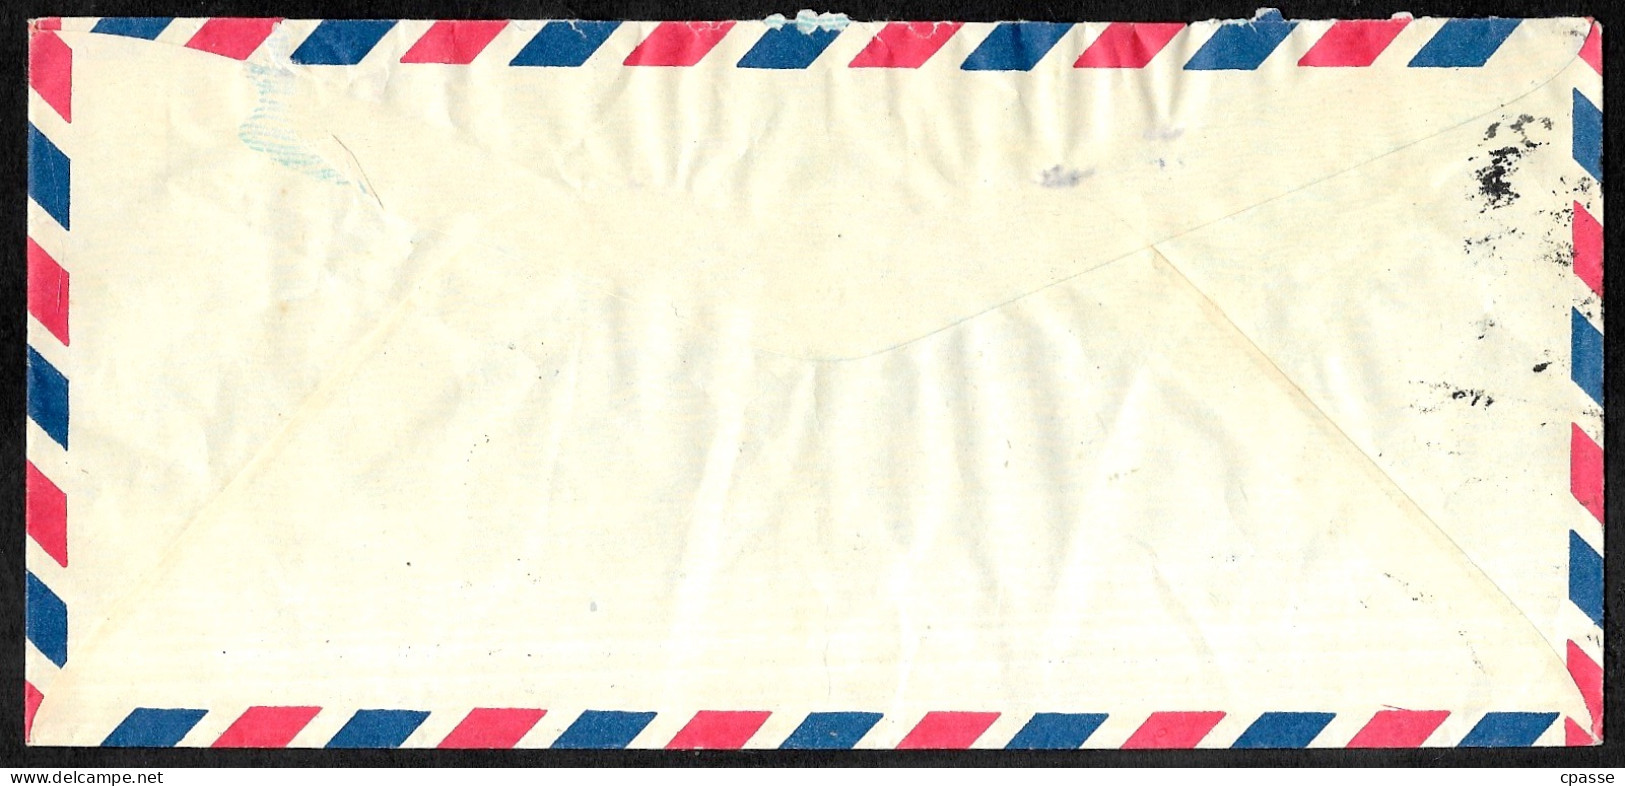 1979 Lettre (5 Stamps) Republic Of CHINA TAIWAN (Formose) Taipei To France POSTE AERIENNE By Air Mail - Luchtpost